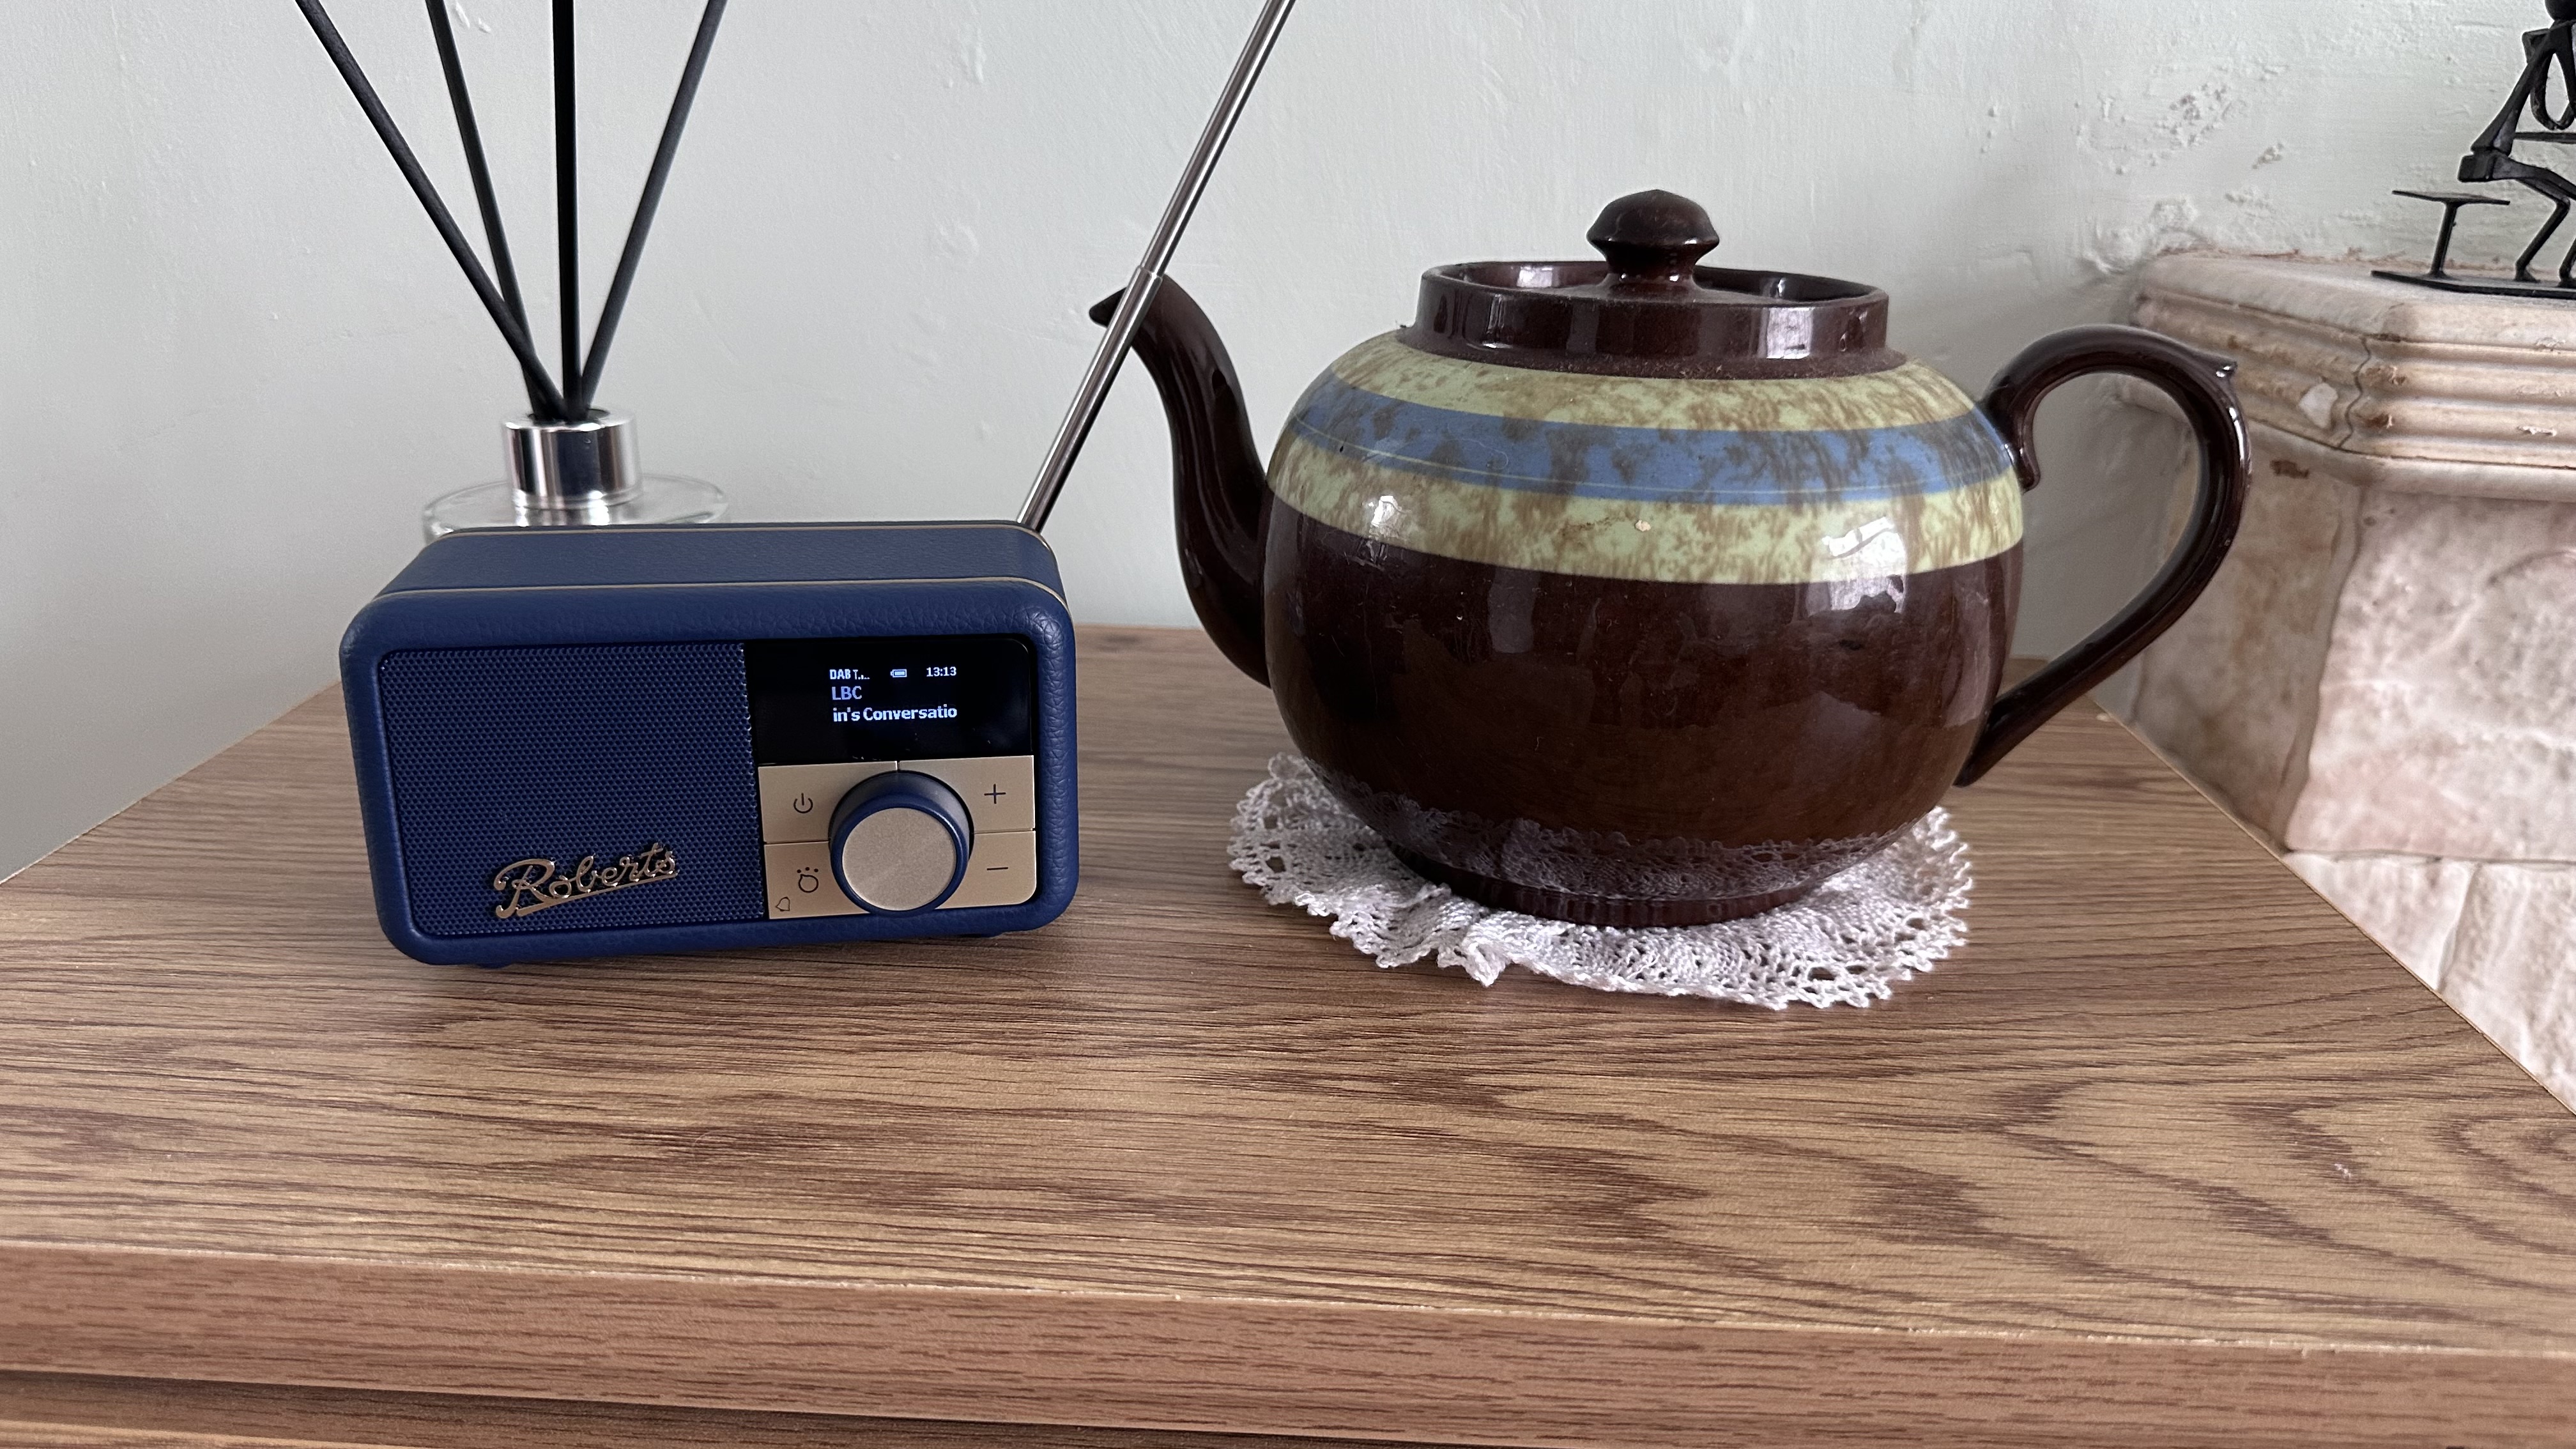 Roberts Revival Petite 2 with a teapot and reed diffuser, to show the size of this tiny radio